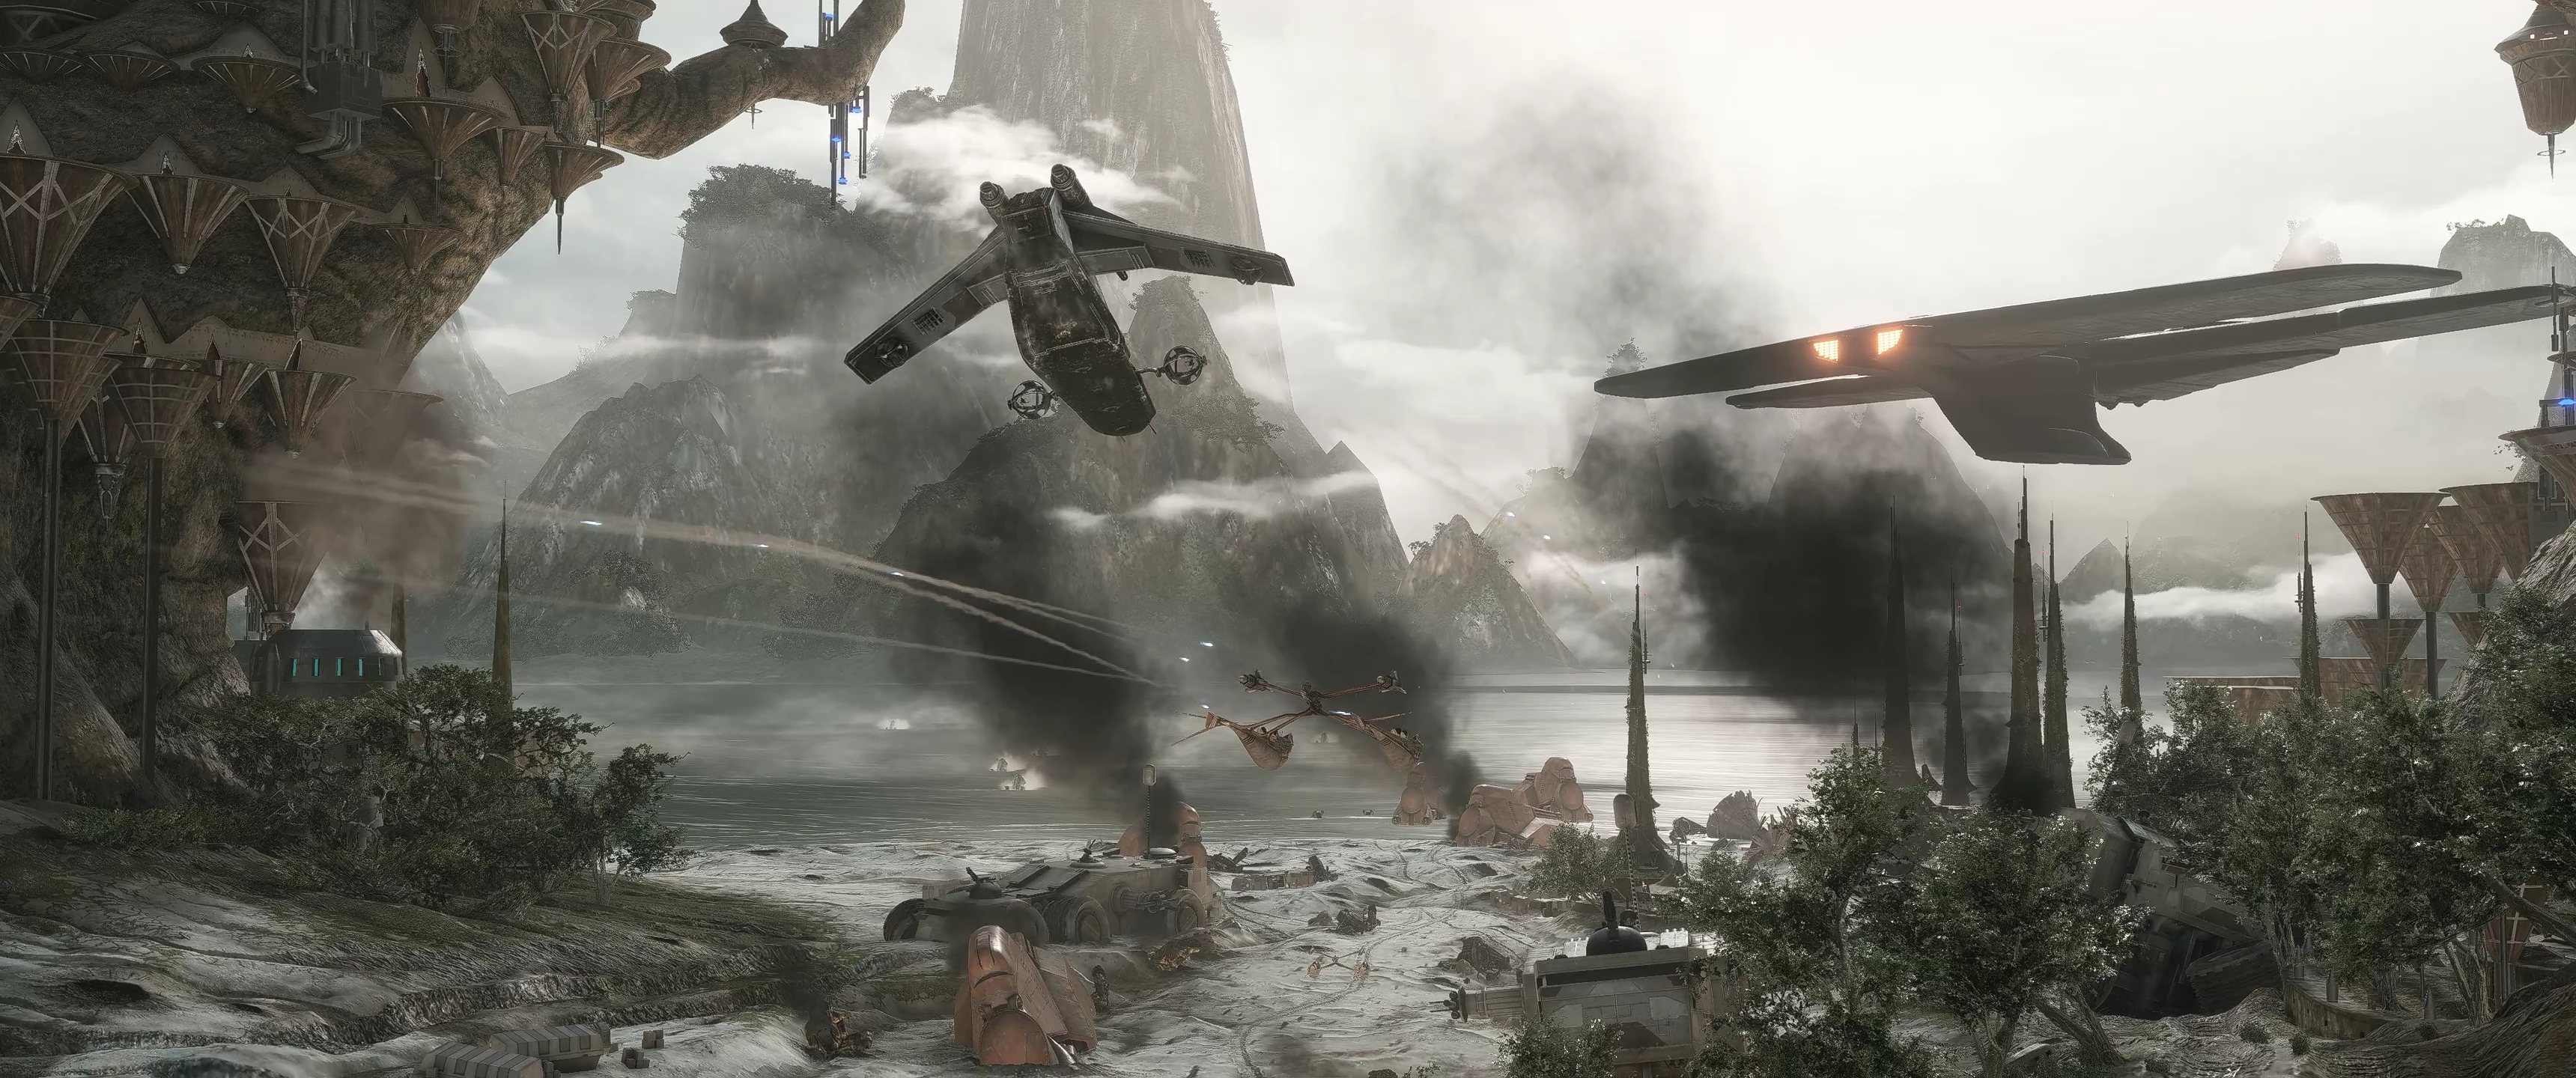 Movie Accurate Cloudy Kashyyyk In Battlefront II